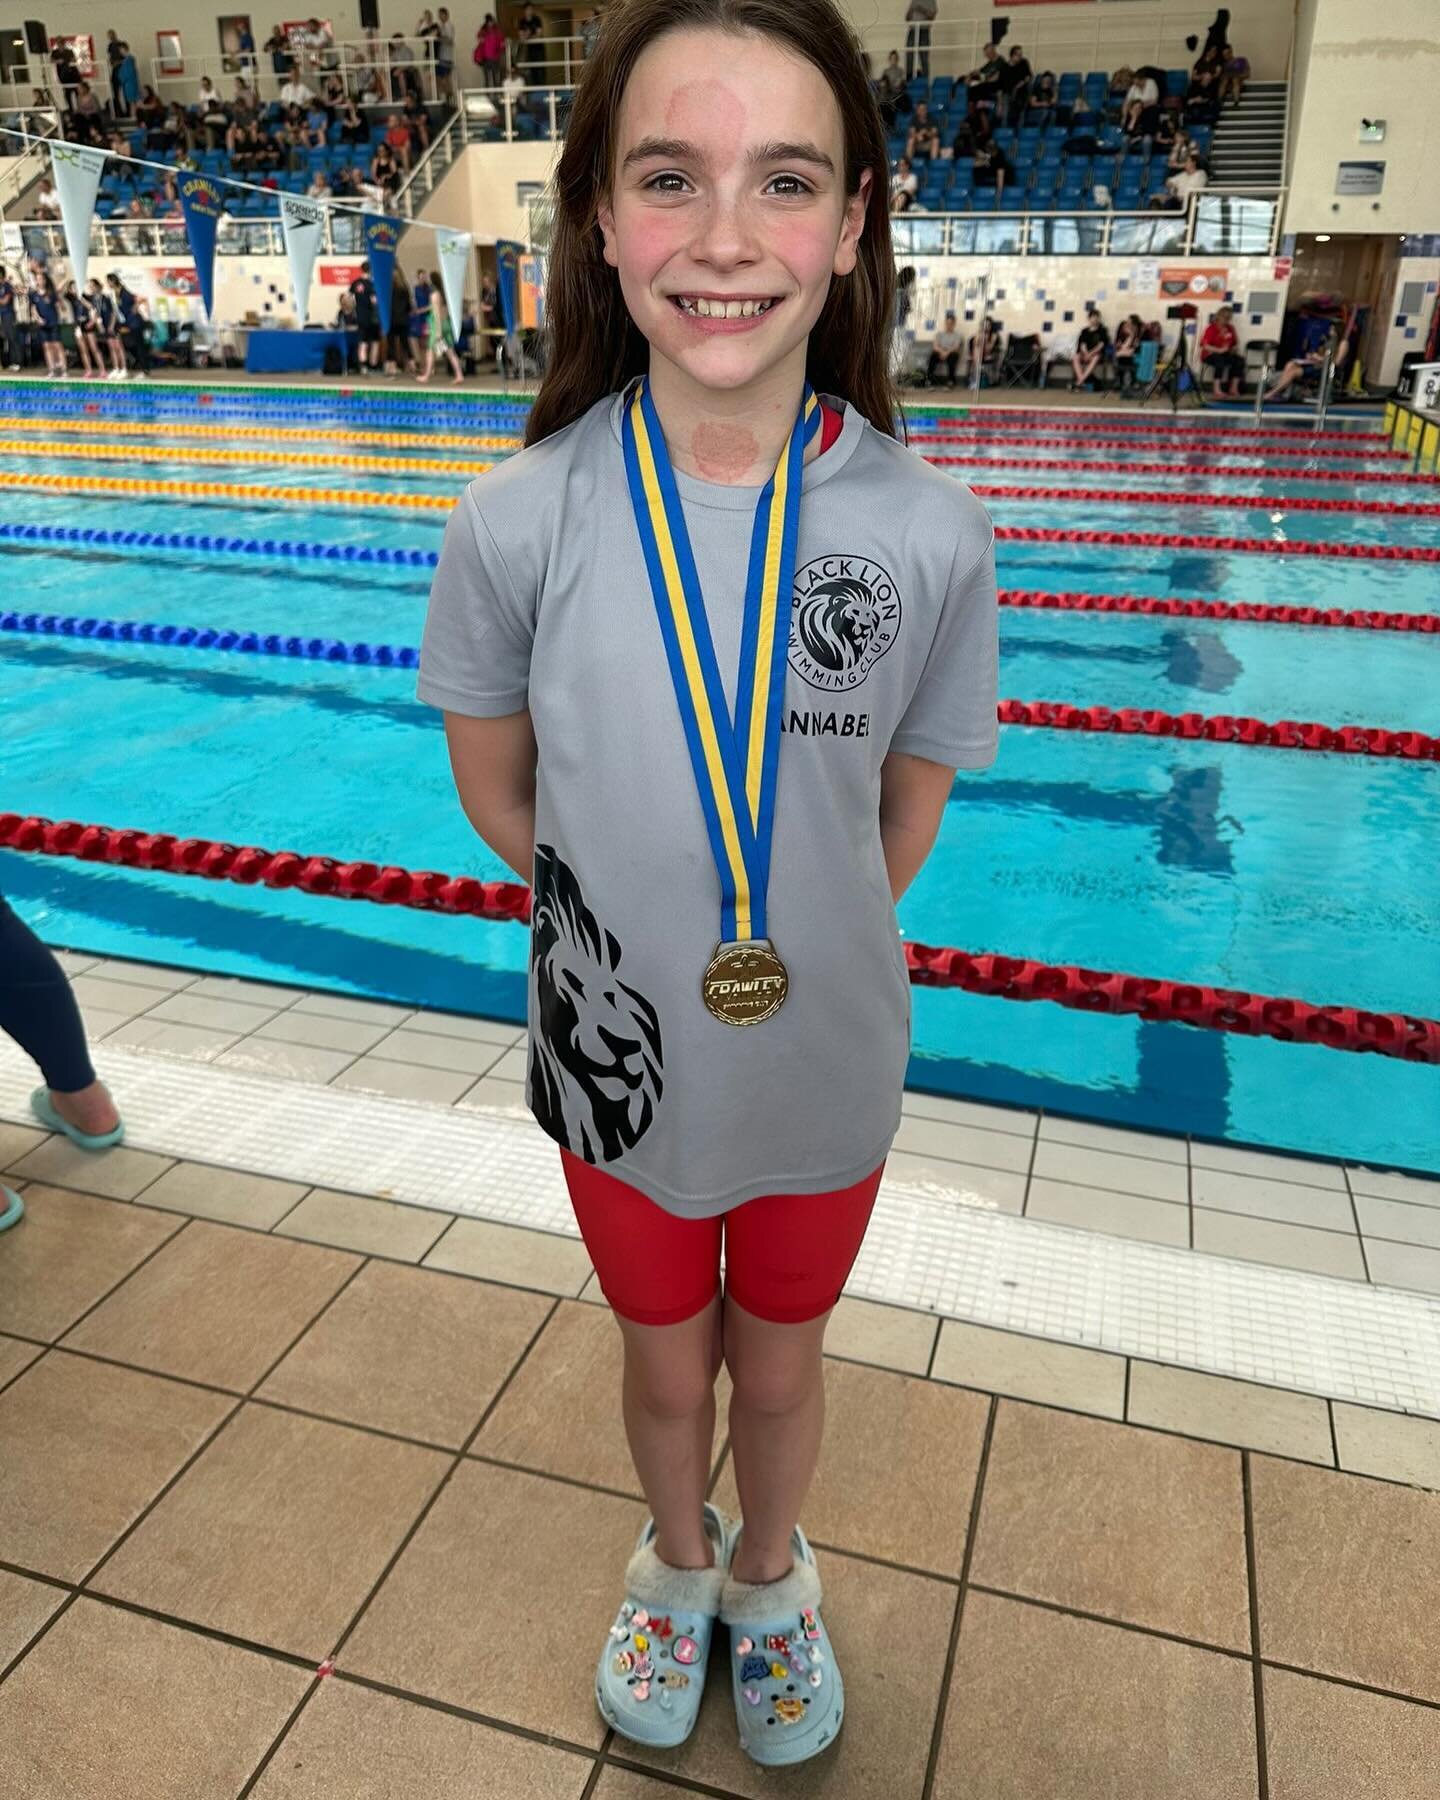 A fantastic weekend of swimming at @crawleysc spring L1 meet 💪🏊🏻&zwj;♀️🏊🏻&zwj;♂️ lots of great swims, PBs and medals! Look at Annabel&rsquo;s smile with that chunky GOLD medal for her awesome swim in the 100m back 🙌💪🥇
#competitiveswimming #co